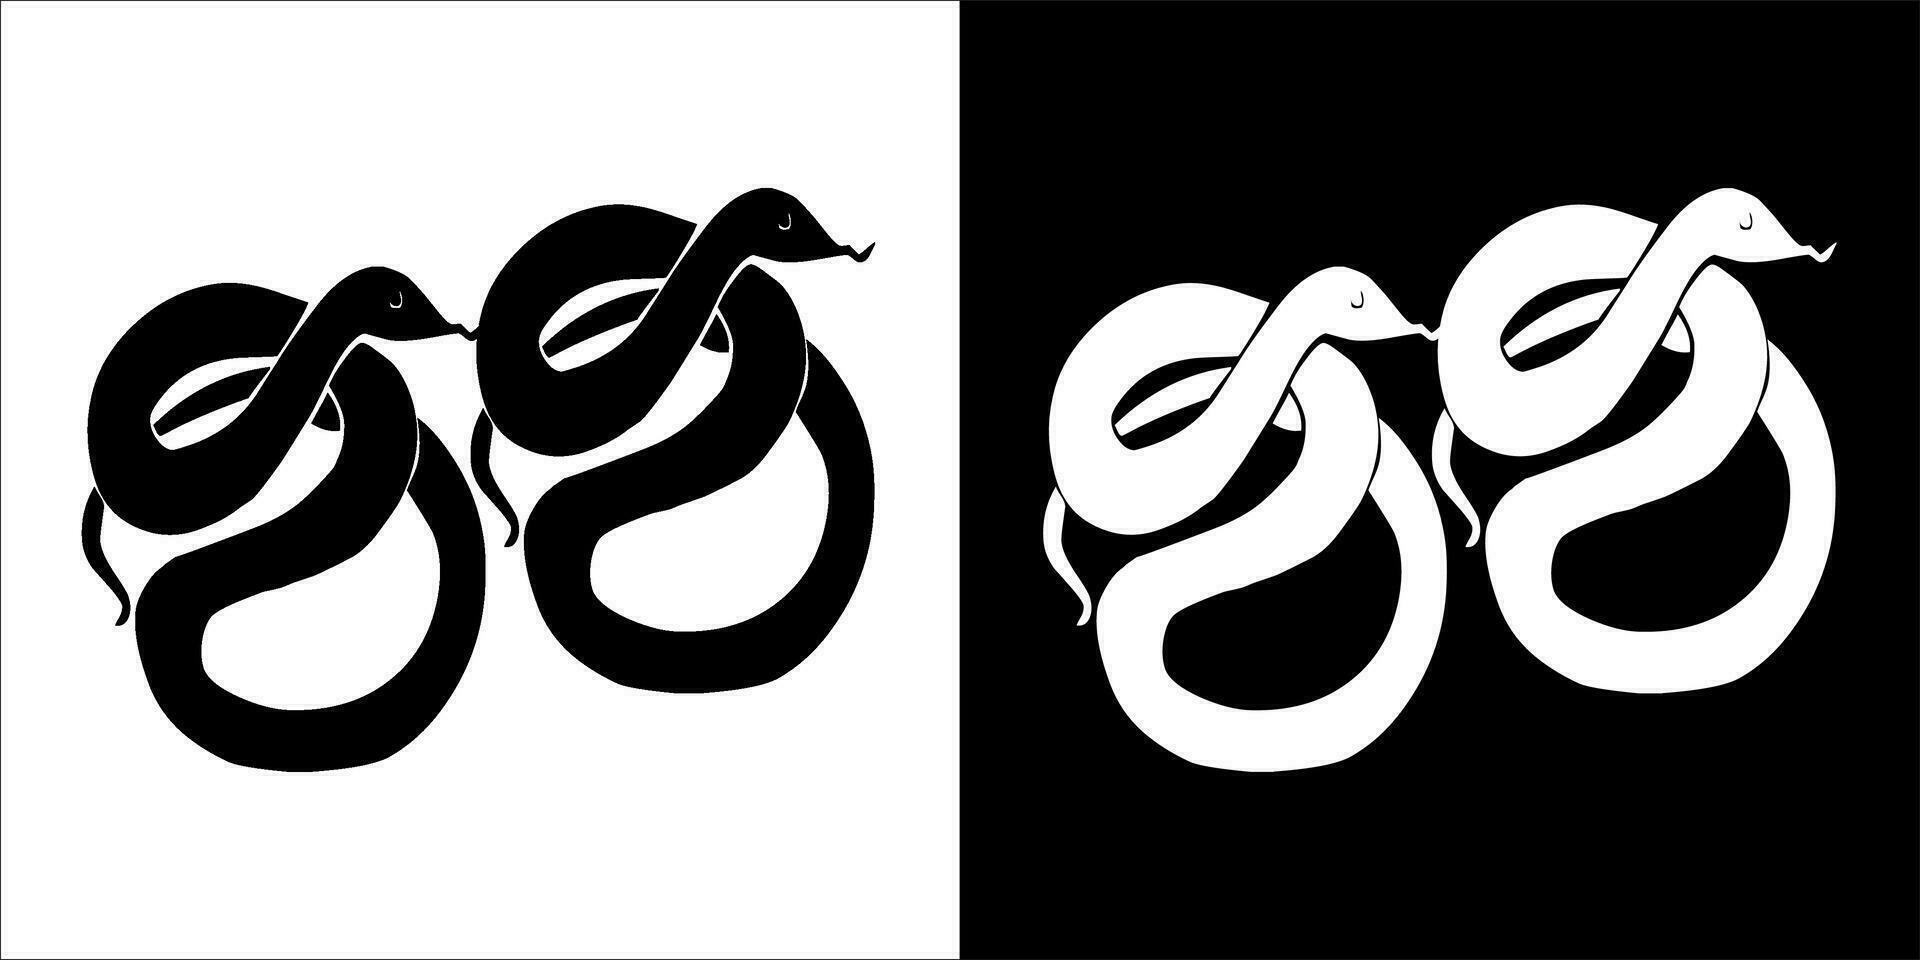 Illustration, vector graphic of snake icon, Black and white color on transparent background